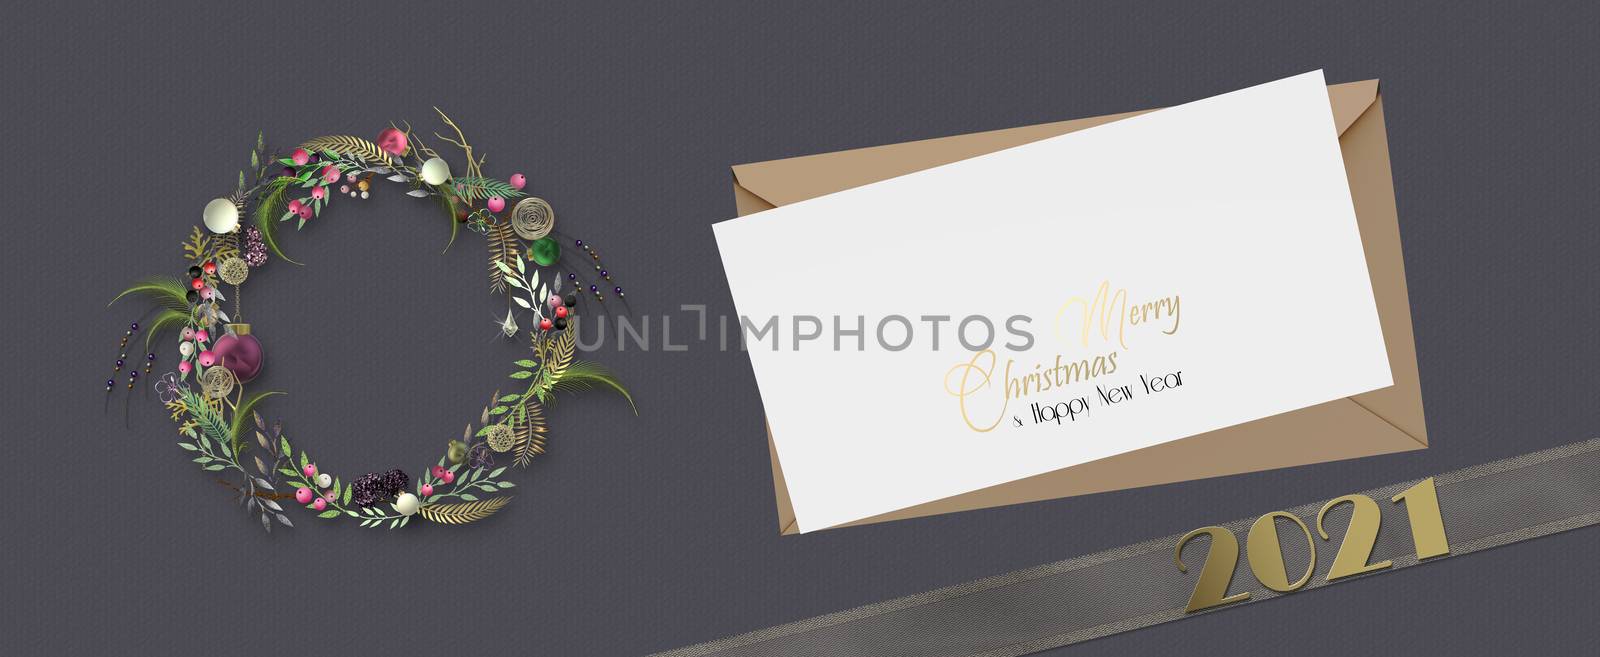 Mock up, holiday New Year Christmas design. Xmas 3D wreath, gold digit 2021 on gold ribbon, envelope, text Merry Christmas Happy New Year on dark black background. 3D render. Mock up, place for text